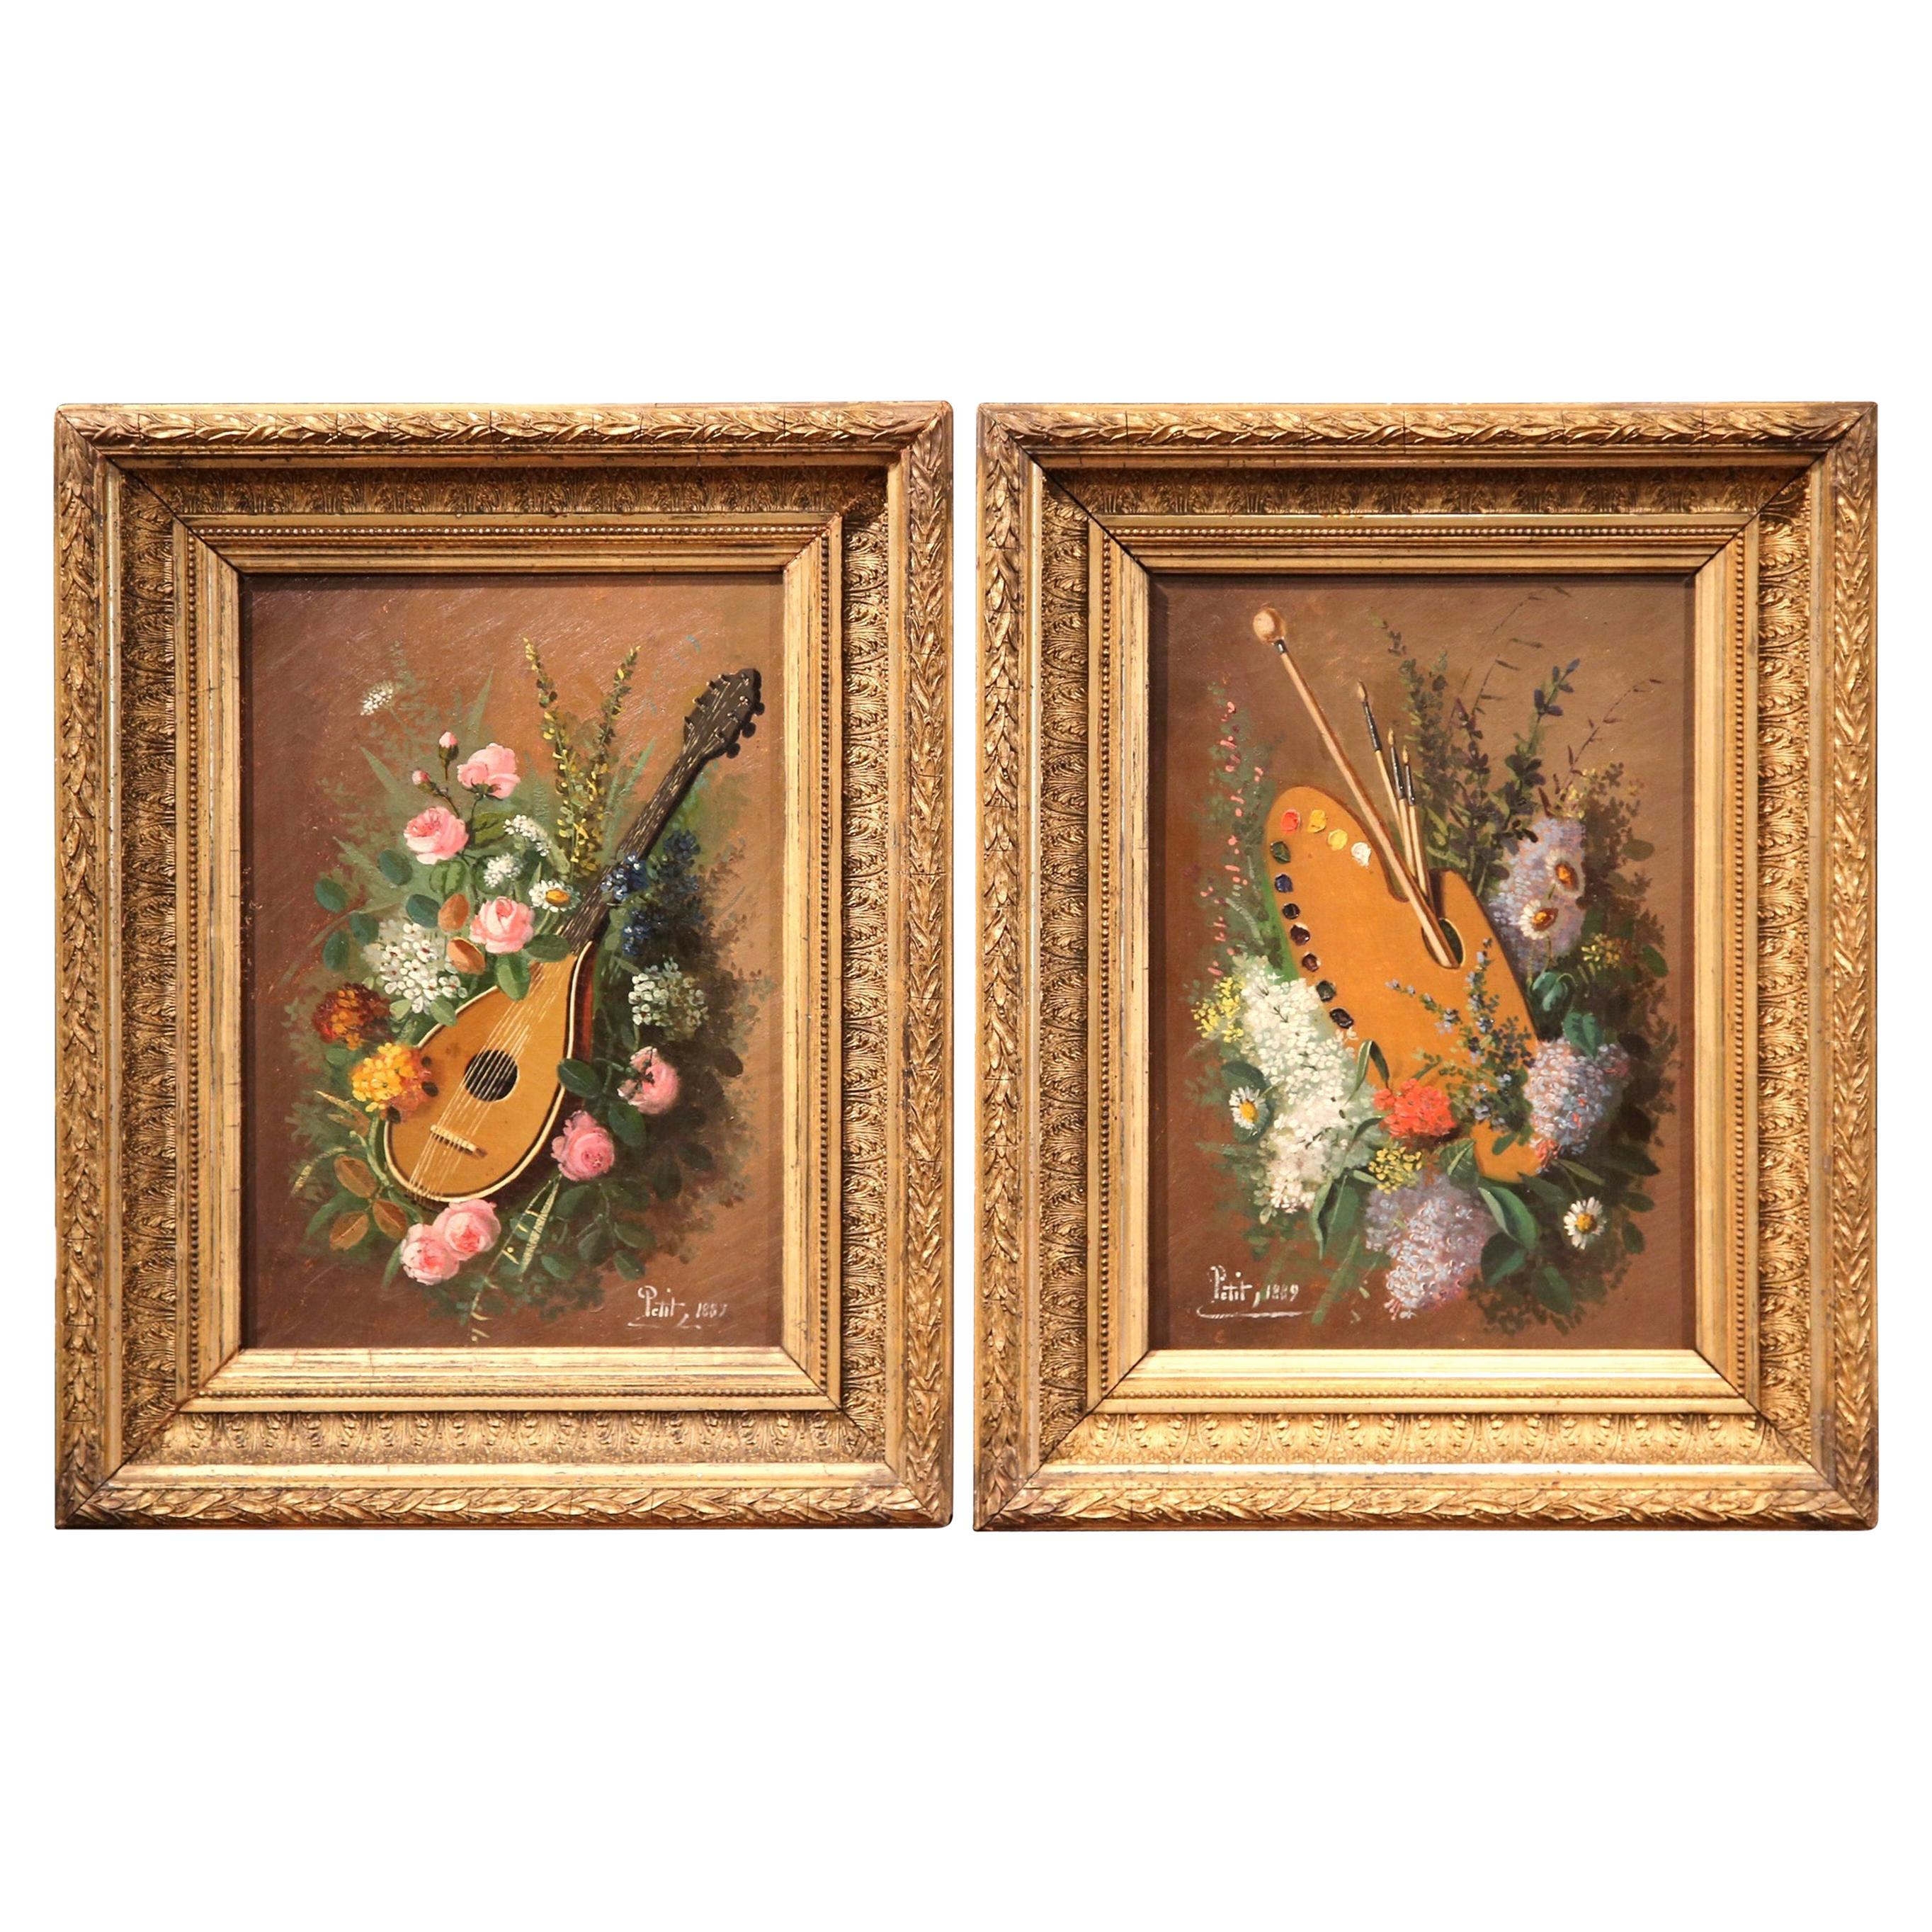 Pair of 19th Century Still Life Paintings in Gilt Frames Signed Petit, 1889